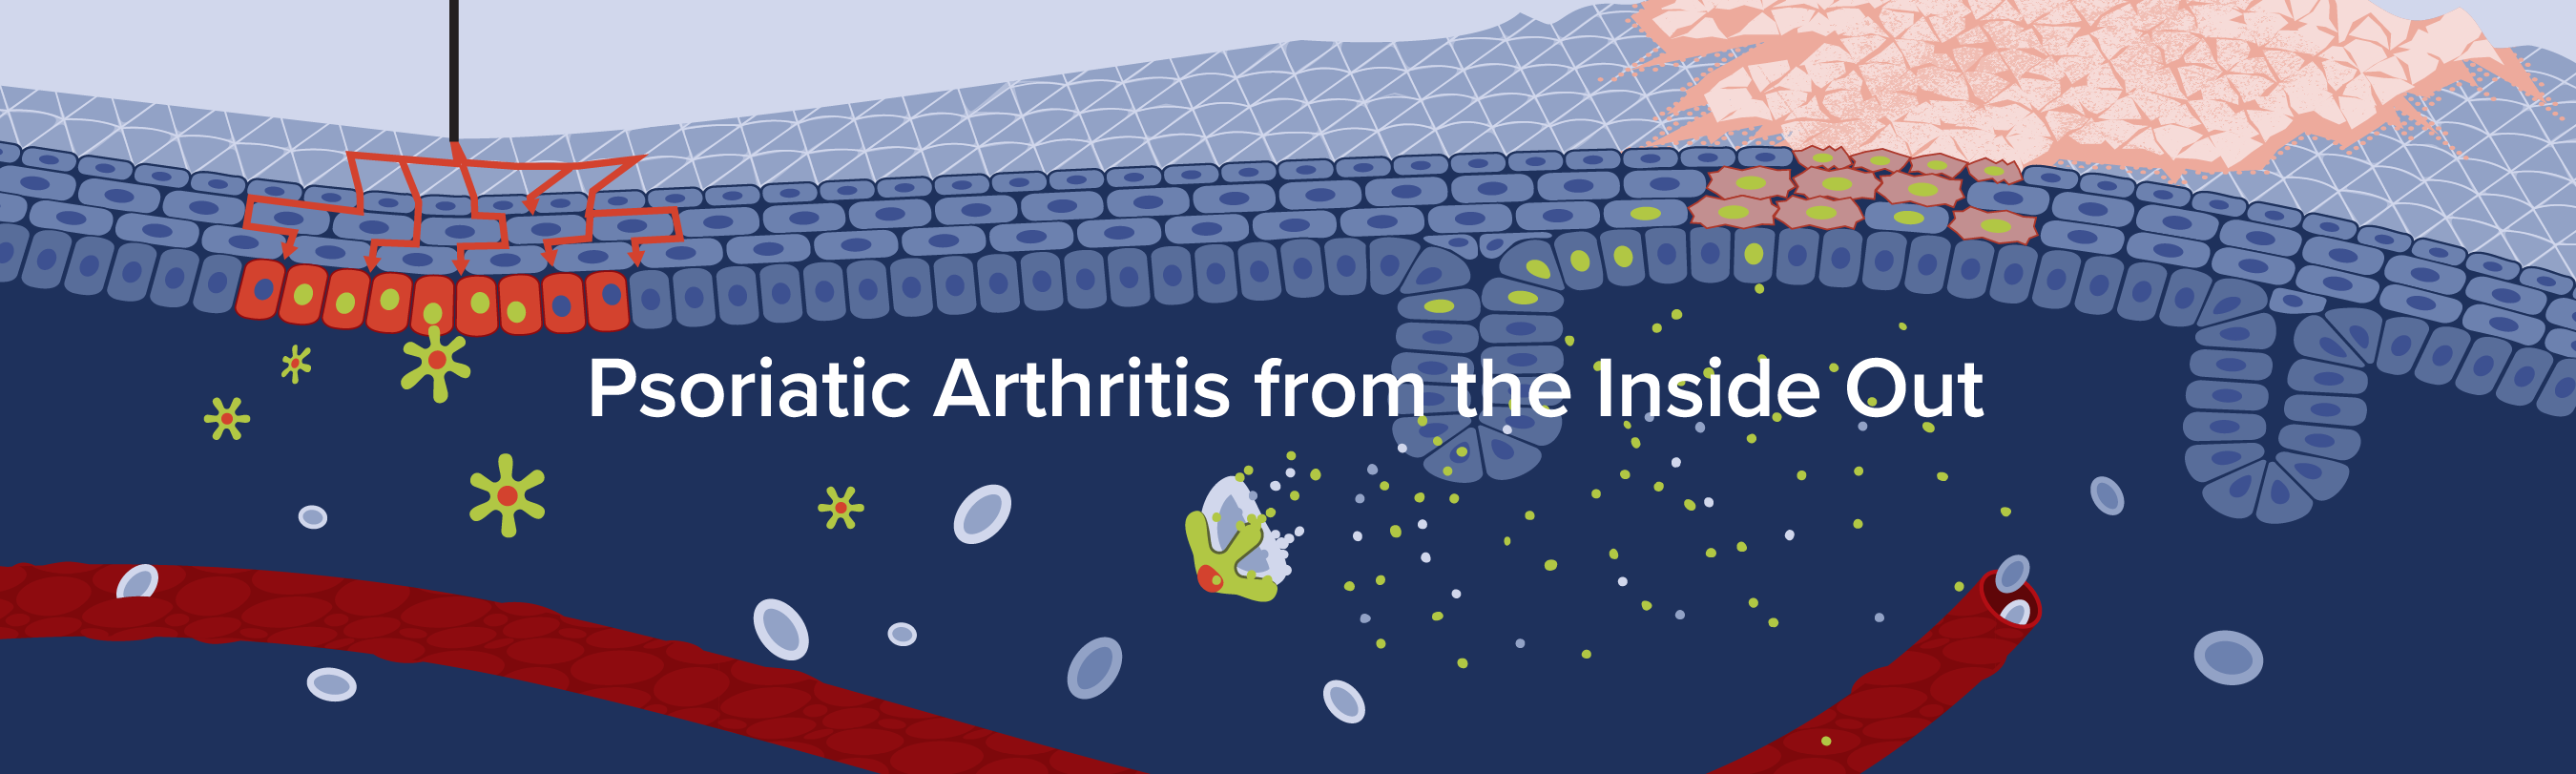 Psoriatic Arthritis from the Inside Out